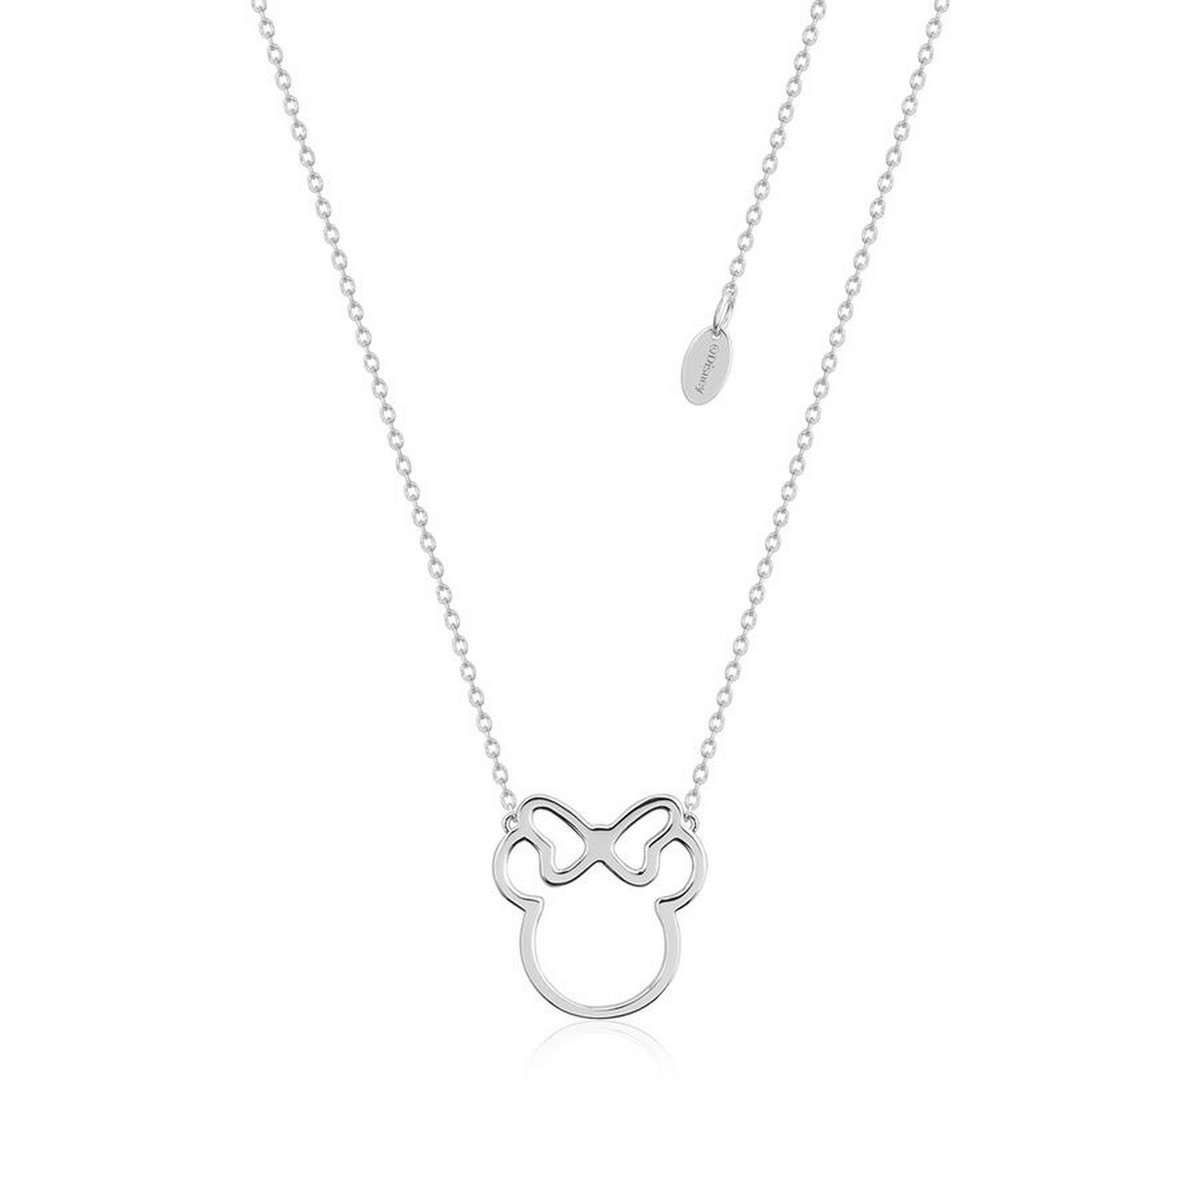 Minnie Mouse silhouette zilveren ketting